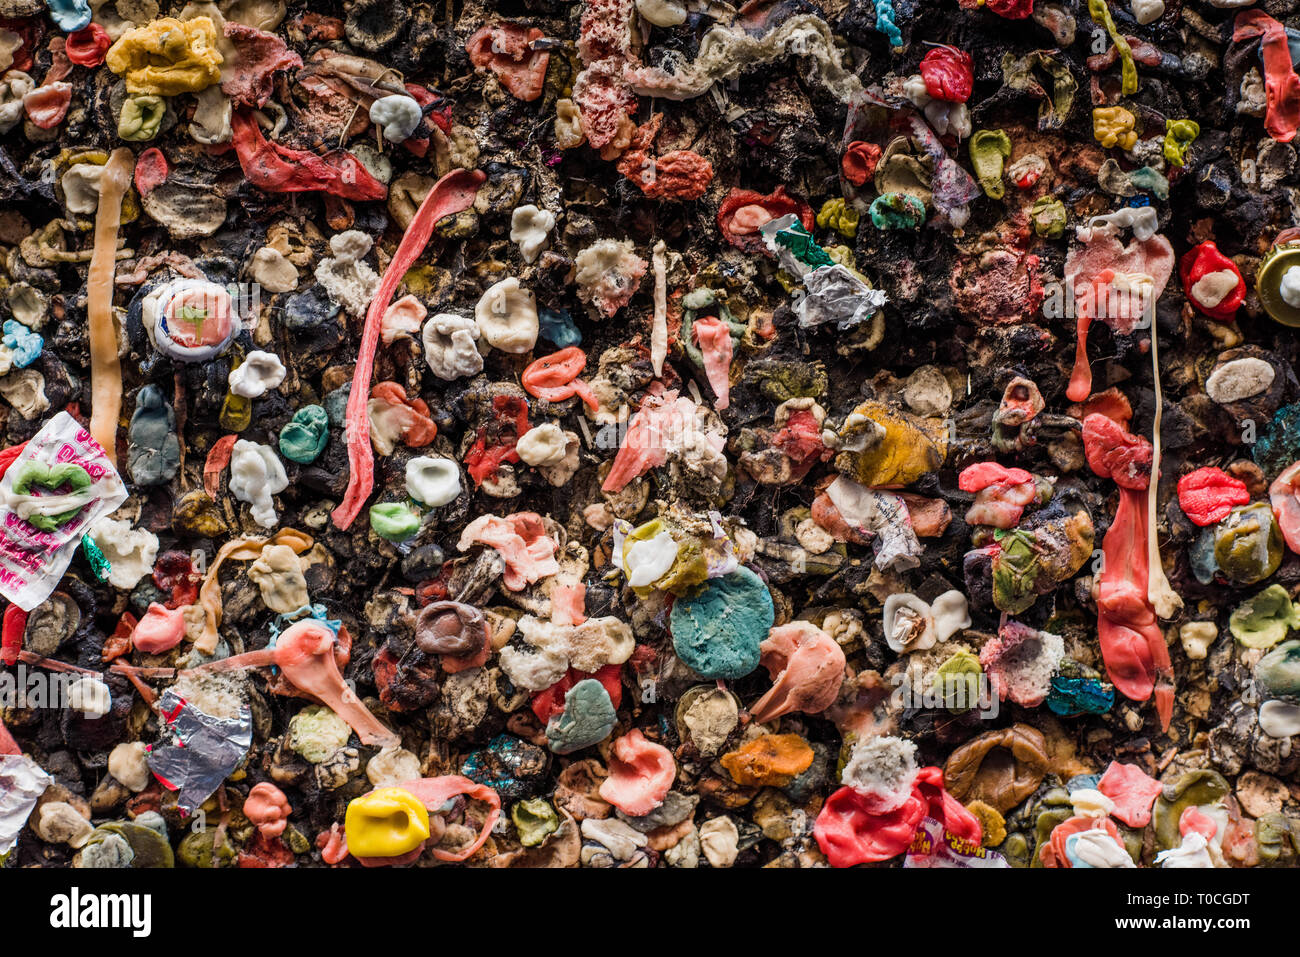 Bubblegum Alley is a tourist attraction in San Luis Obispo, California, known for its accumulation of used bubble gum on the walls of an alley. Stock Photo